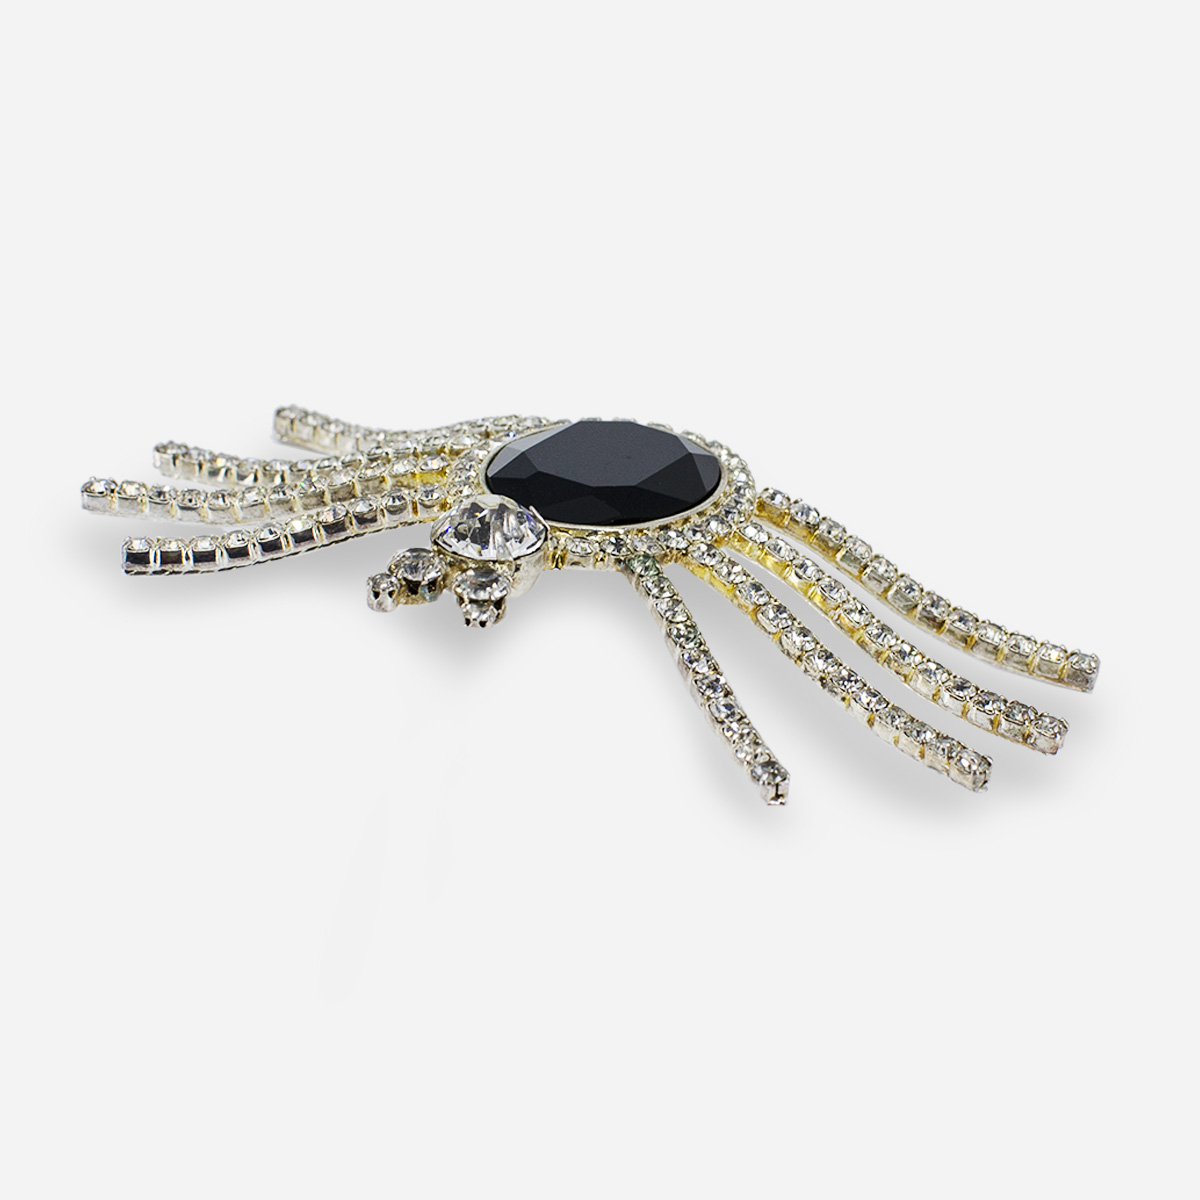 Crystal spider pin